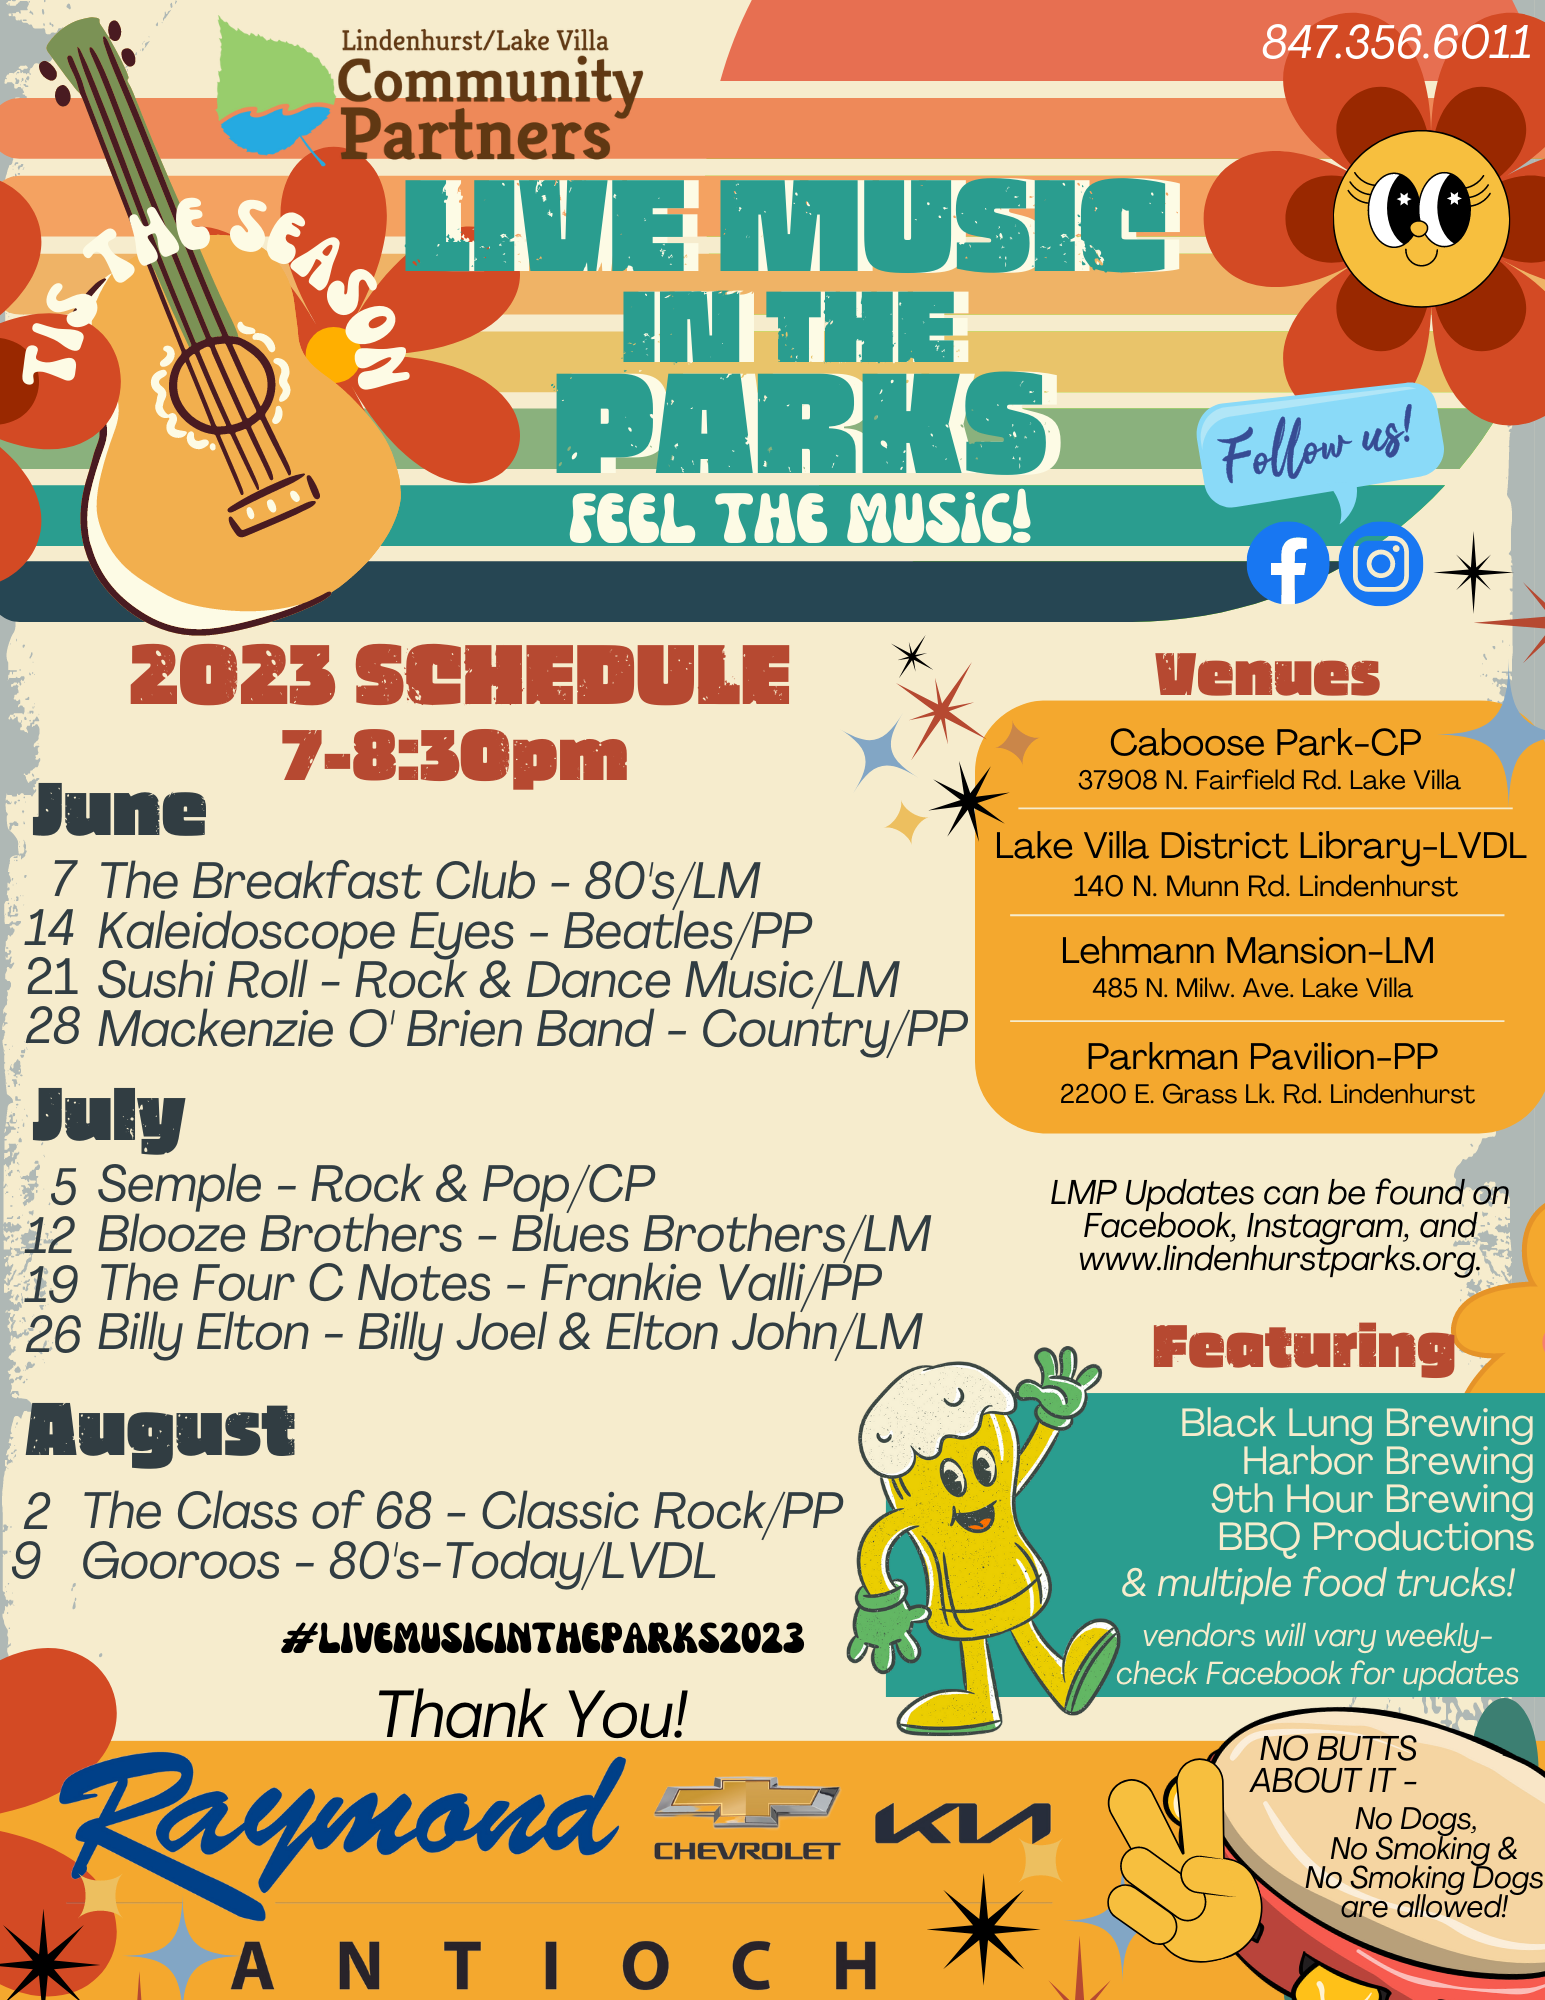 
A vibrant and colorful event schedule flyer for "LIVE MUSIC IN THE PARKS 2023," listing performances from June to August with bands like The Breakfast Club, Kaleidoscope Eyes, and Sushi Roll. It includes the event times, venues like Caboose Park and Lehmann Mansion, and the social media reminder to follow for updates. The flyer promotes local breweries and food trucks that will feature at the events and notes the no pets and no smoking policies. The hashtag #LIVEMUSICINTHEPARKS2023 is promoted along with sponsor acknowledgments at the bottom